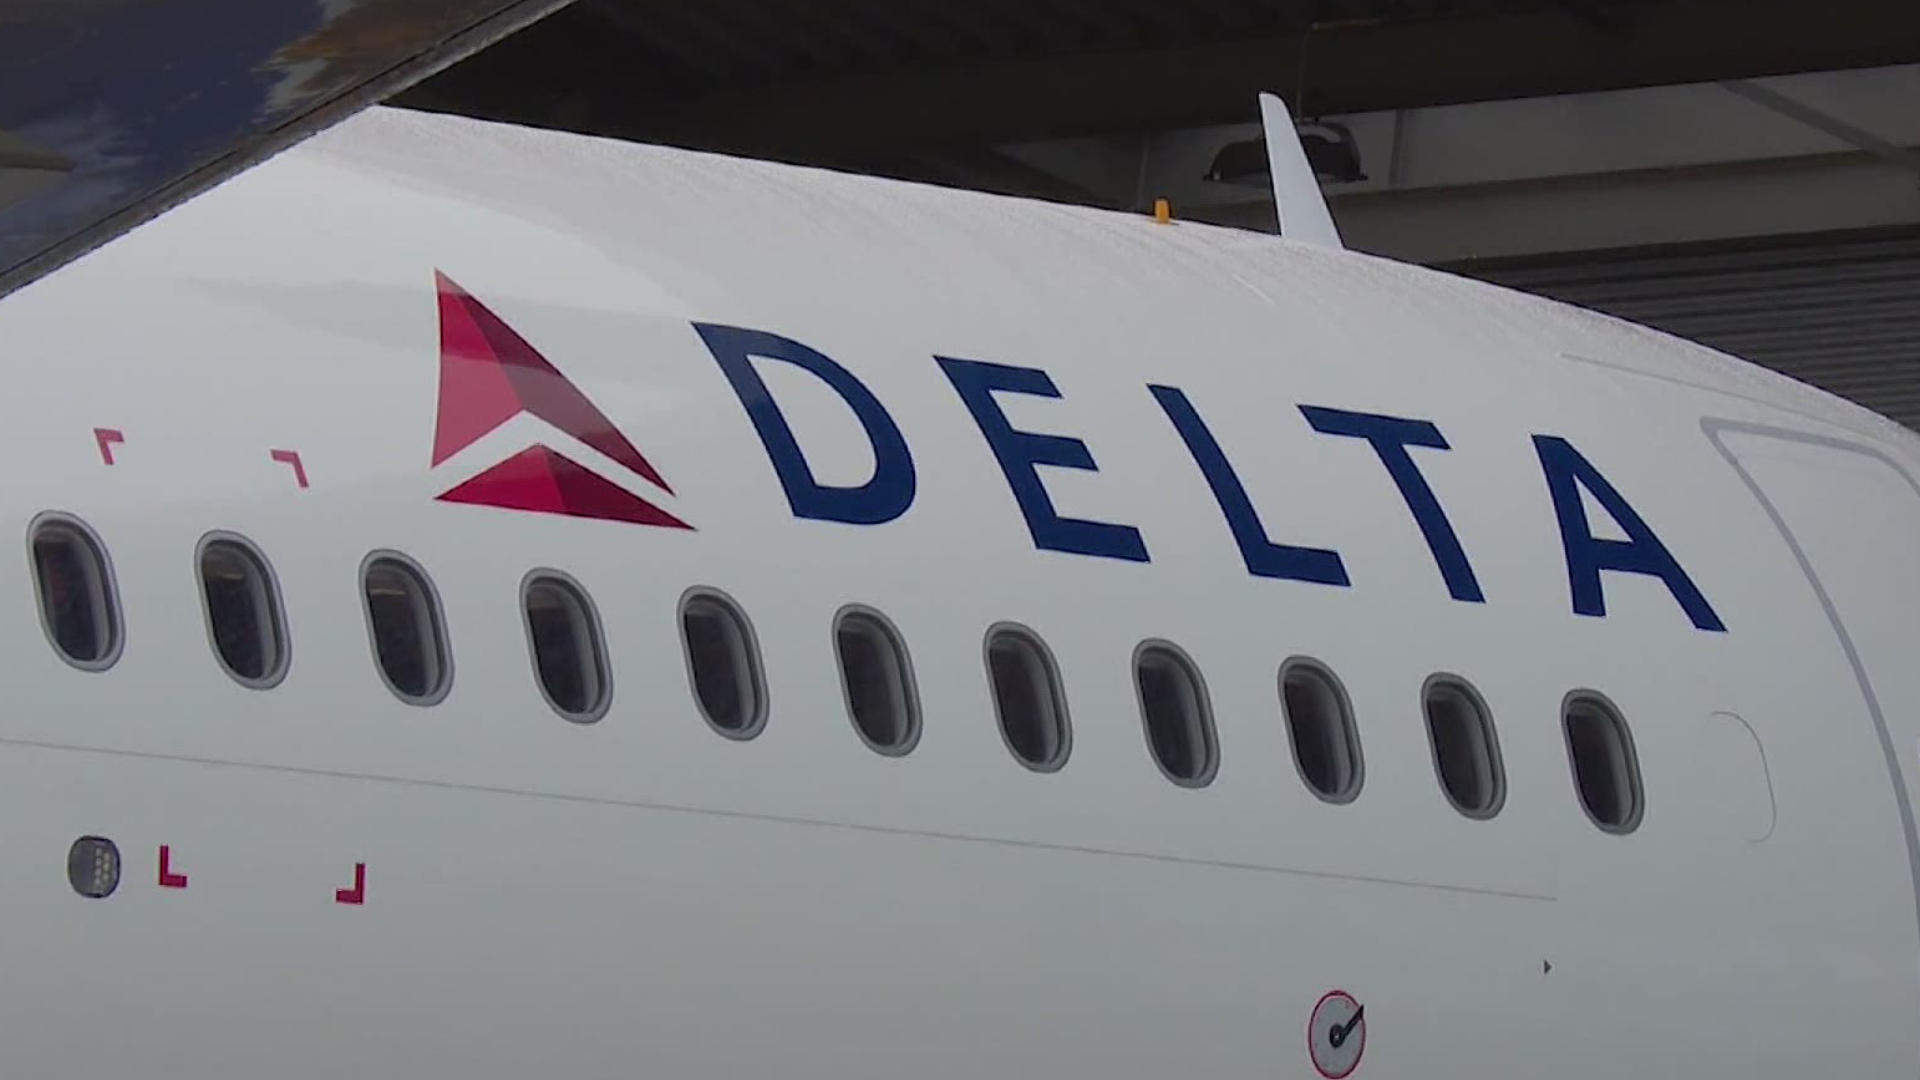 As Delta Air Lines works its way through COVID-19,  burning more cash than fuel, it's grounding hundreds of planes & keeping middle seats empty, but lowering fares.